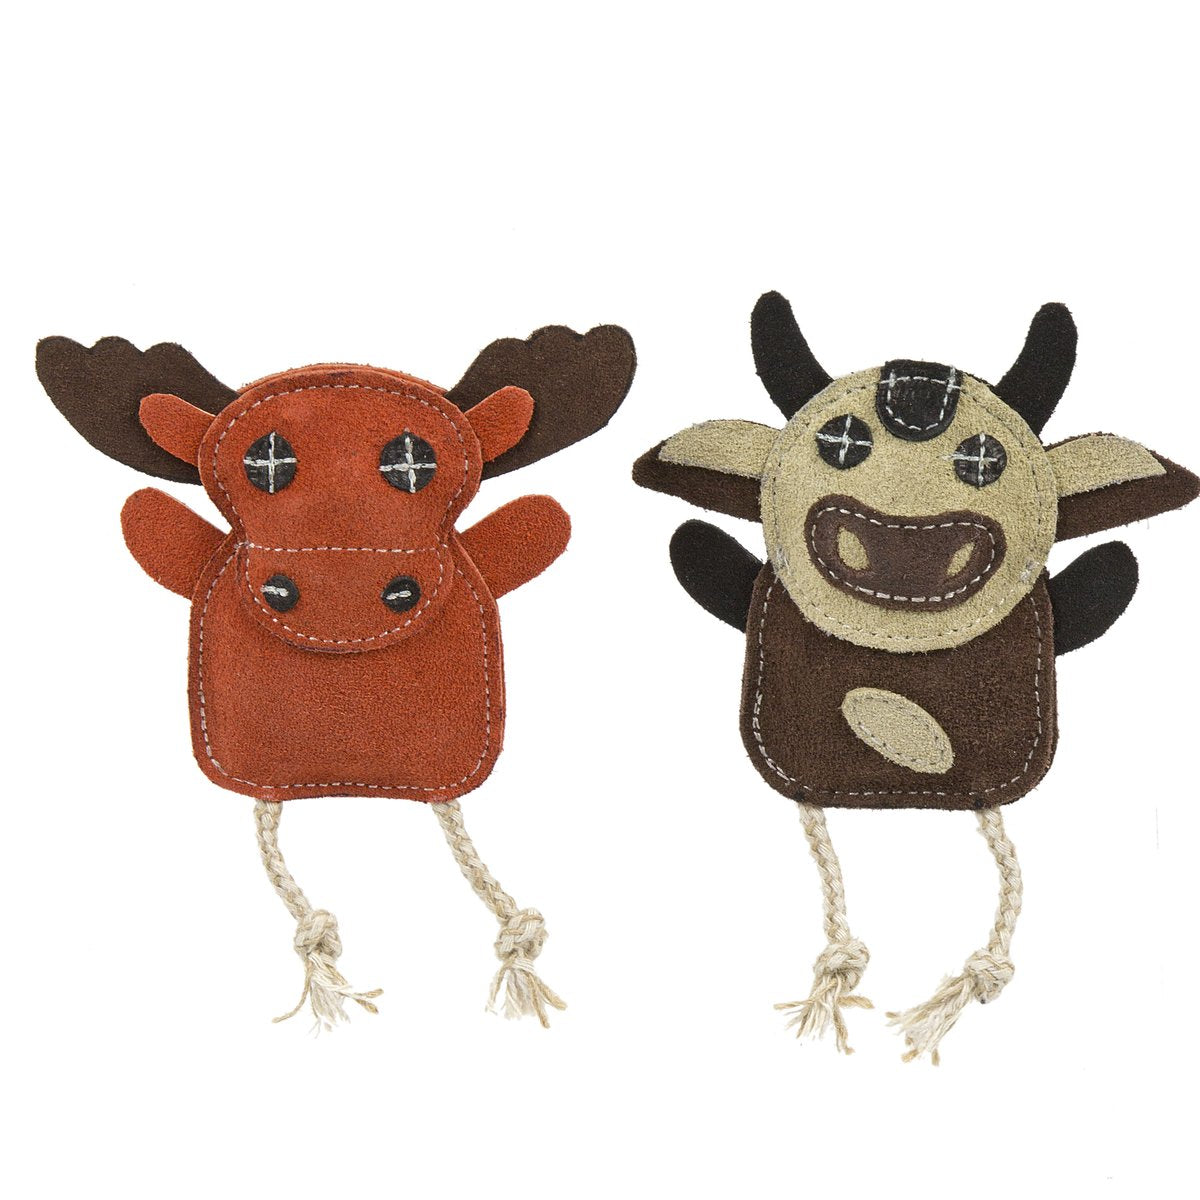 Hugglehounds Natural Leather Wee Buddies 2pk - Cow Moose